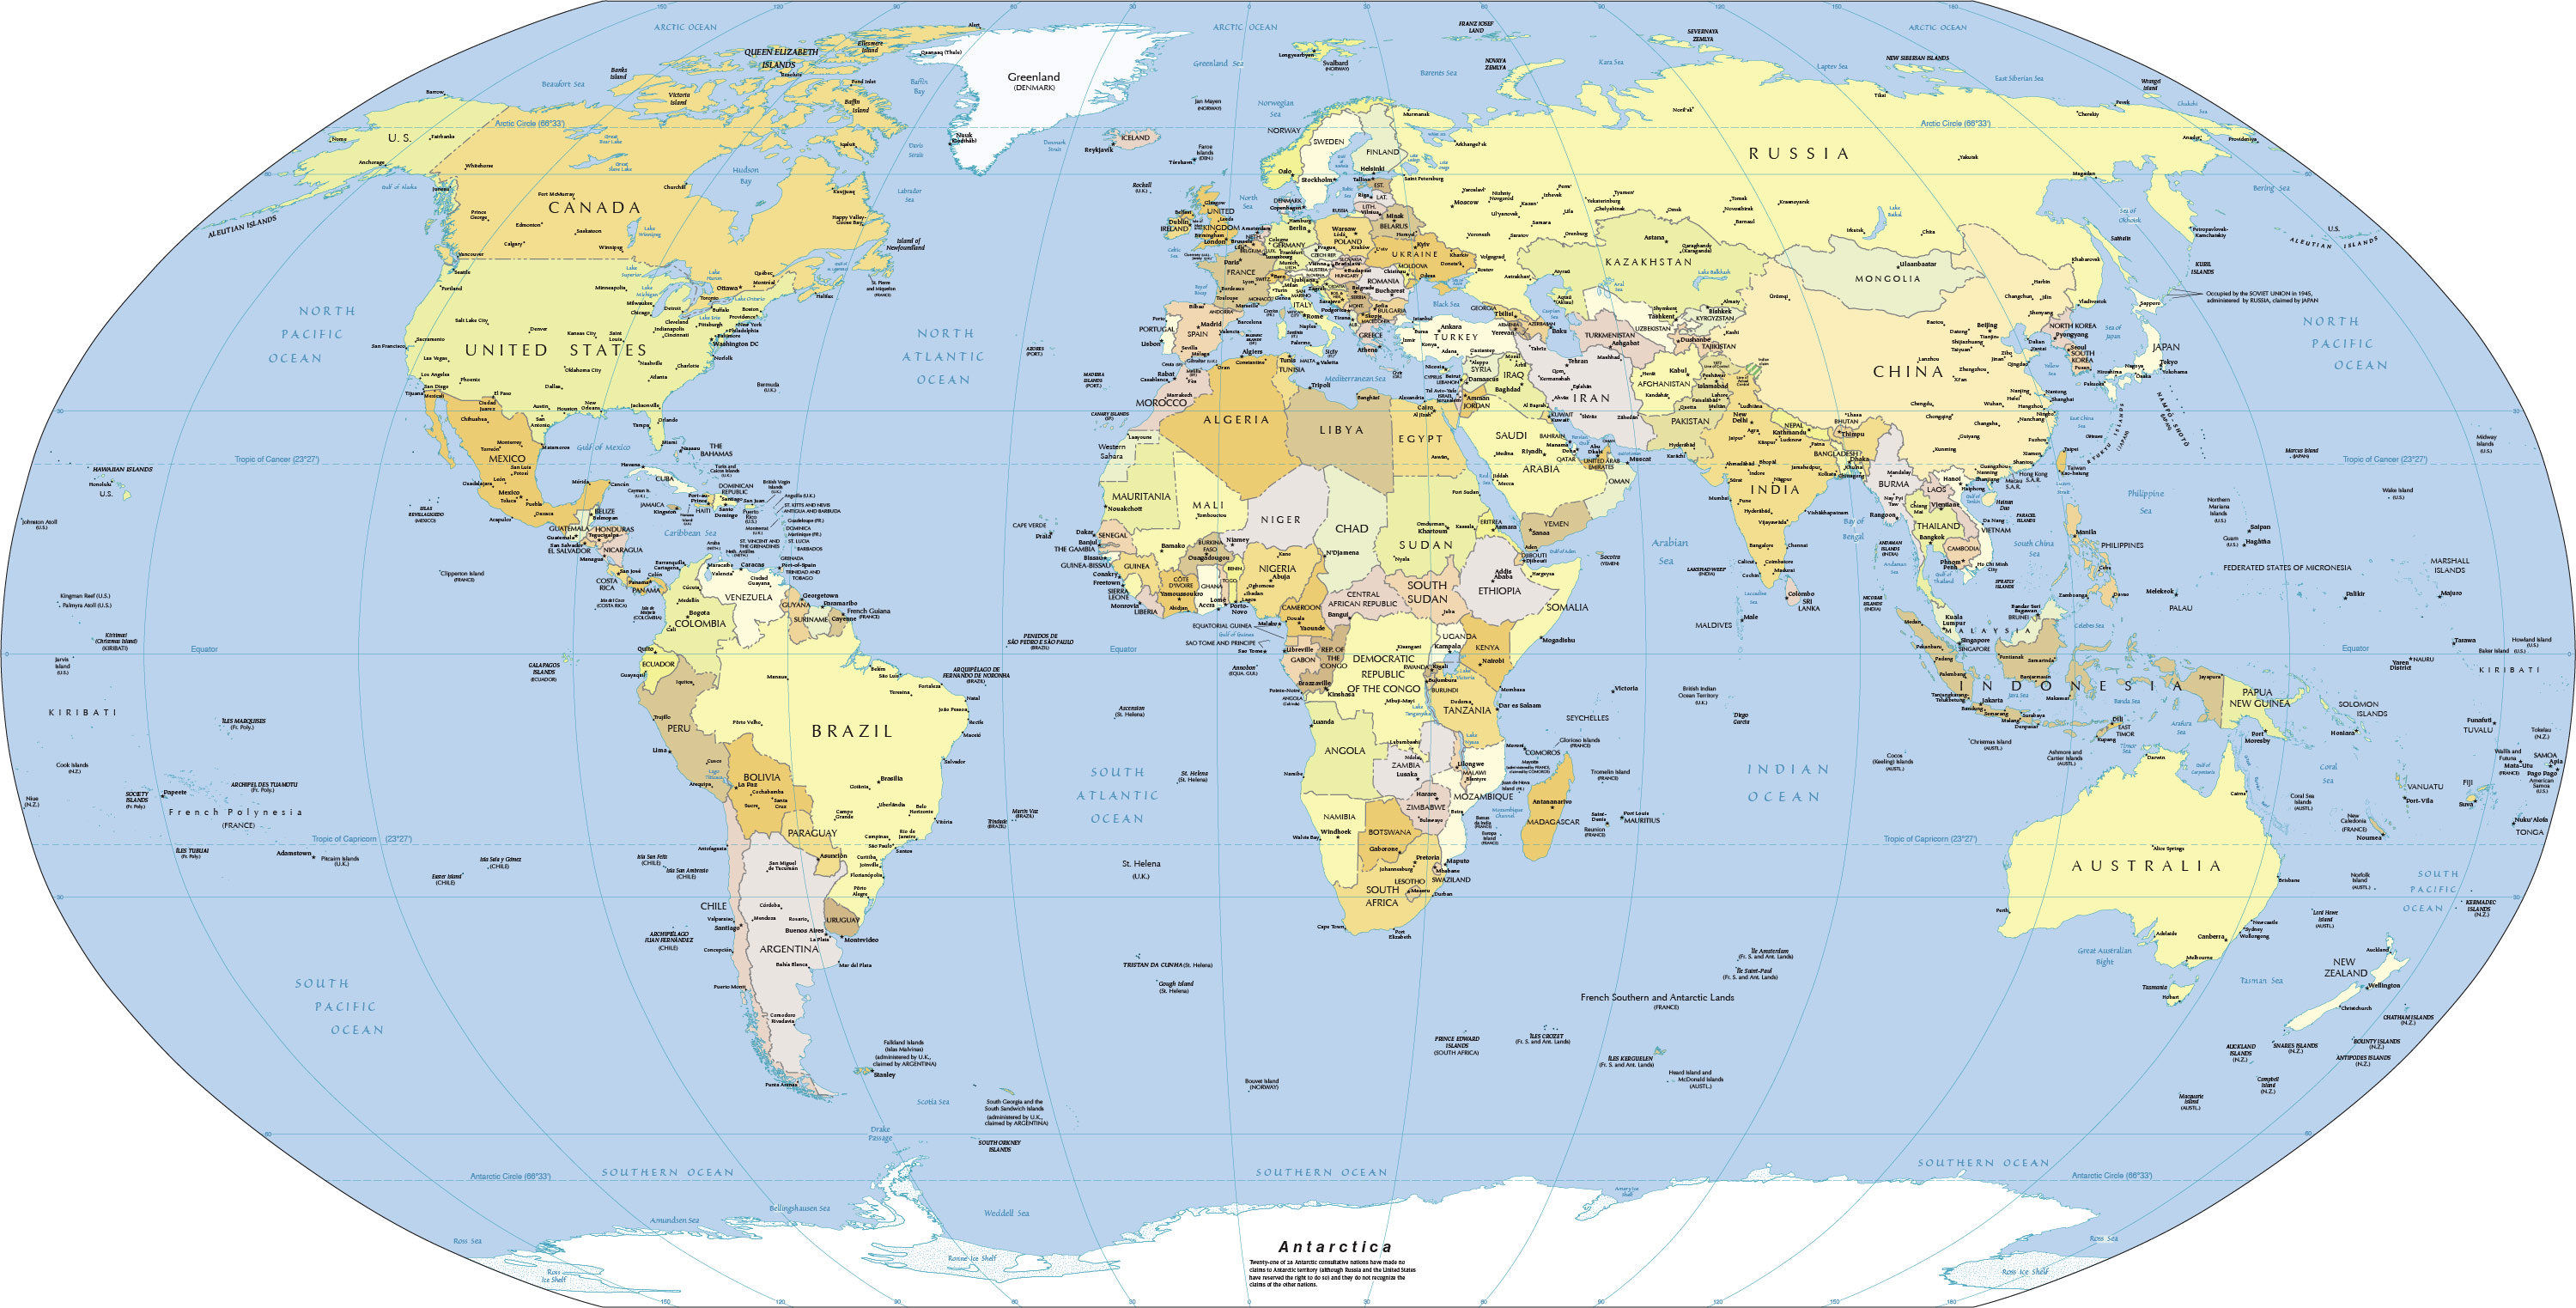 world-map-political-of-the-2013-nations-online-project-best.jpg